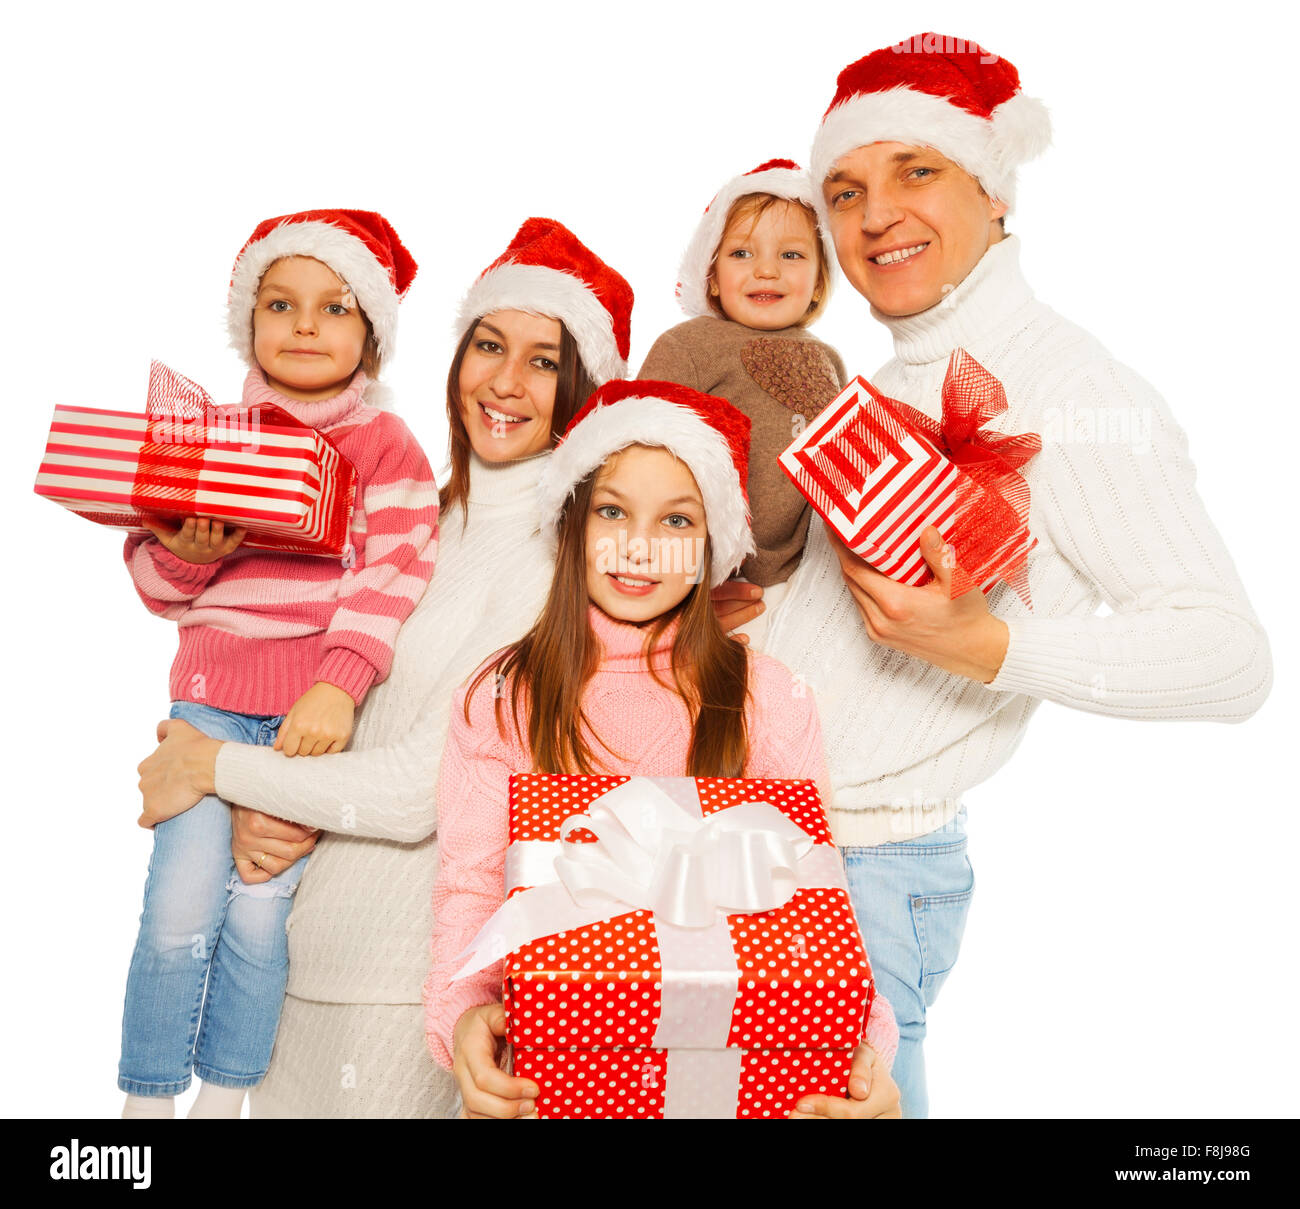 Happy family with 3kids hold New Year presents Stock Photo